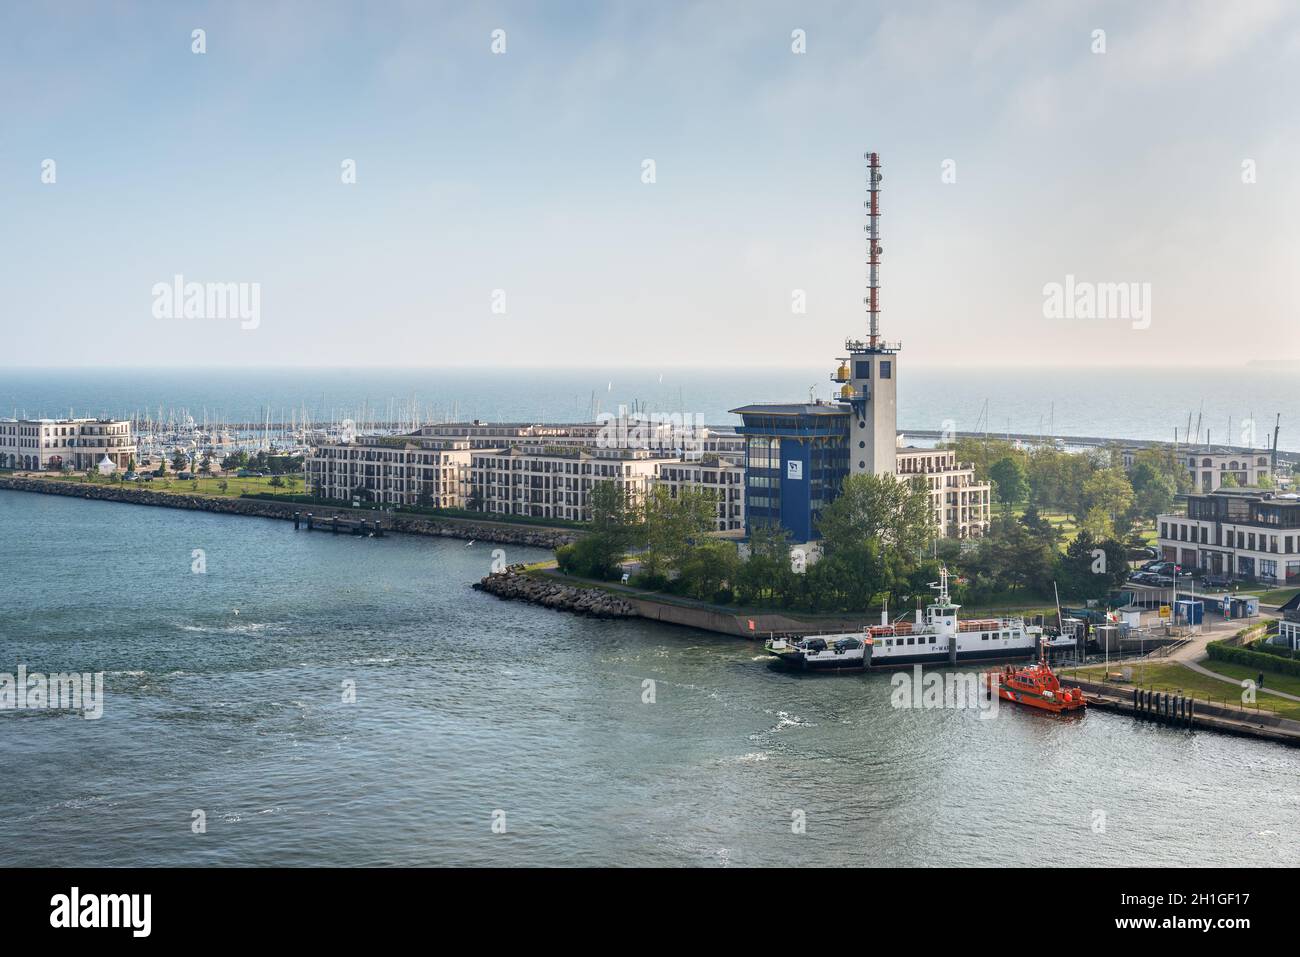 Rostock, Germany - May 26, 2017: View from the ship on the coast of Baltic Sea with a control tower in the port of Warnemunde, Rostock, Mecklenburg, G Stock Photo